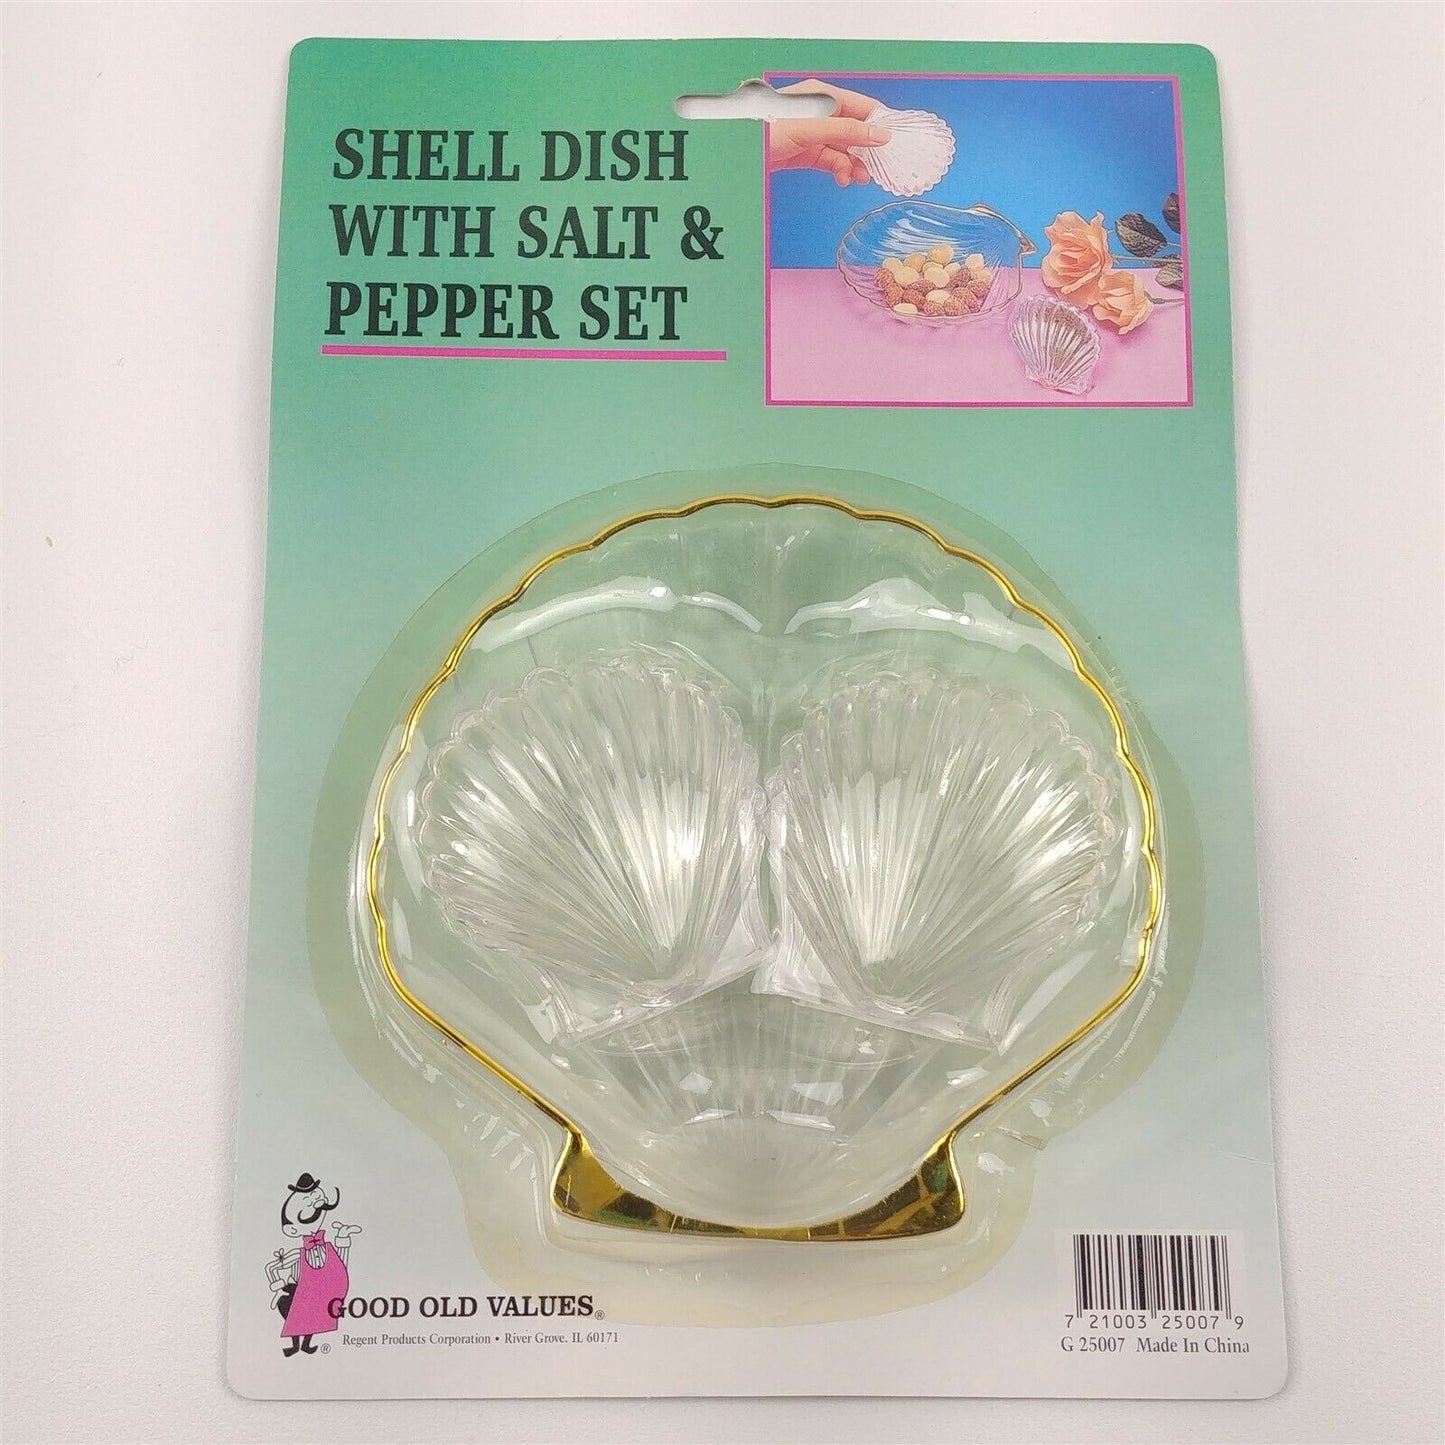 Plastic Sea Shell Salt & Pepper Shakers w/ Shell Dish in Packaging